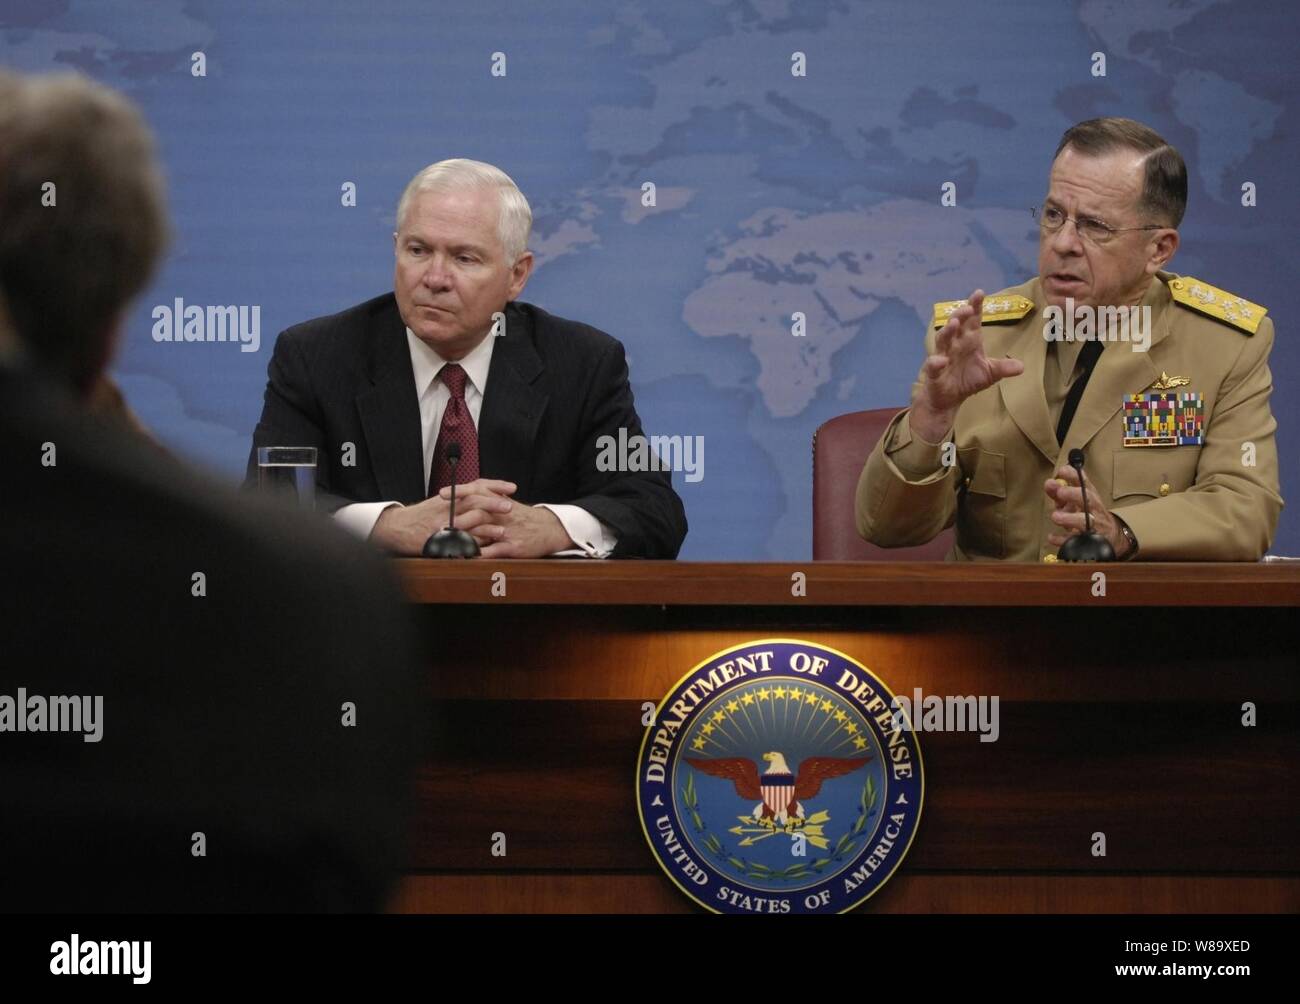 Secretary of Defense Robert M. Gates (left) and Chairman of the Joint Chiefs of Staff Adm. Michael Mullen, U.S. Navy, conduct a press briefing where they announce Army Lt. Gen. Stanley McChrystal is to replace Army Gen. David D. McKierna as commander of NATO's International Security Assistance Force and U.S. forces in Afghanistan in the Pentagon on May 11, 2009. Stock Photo